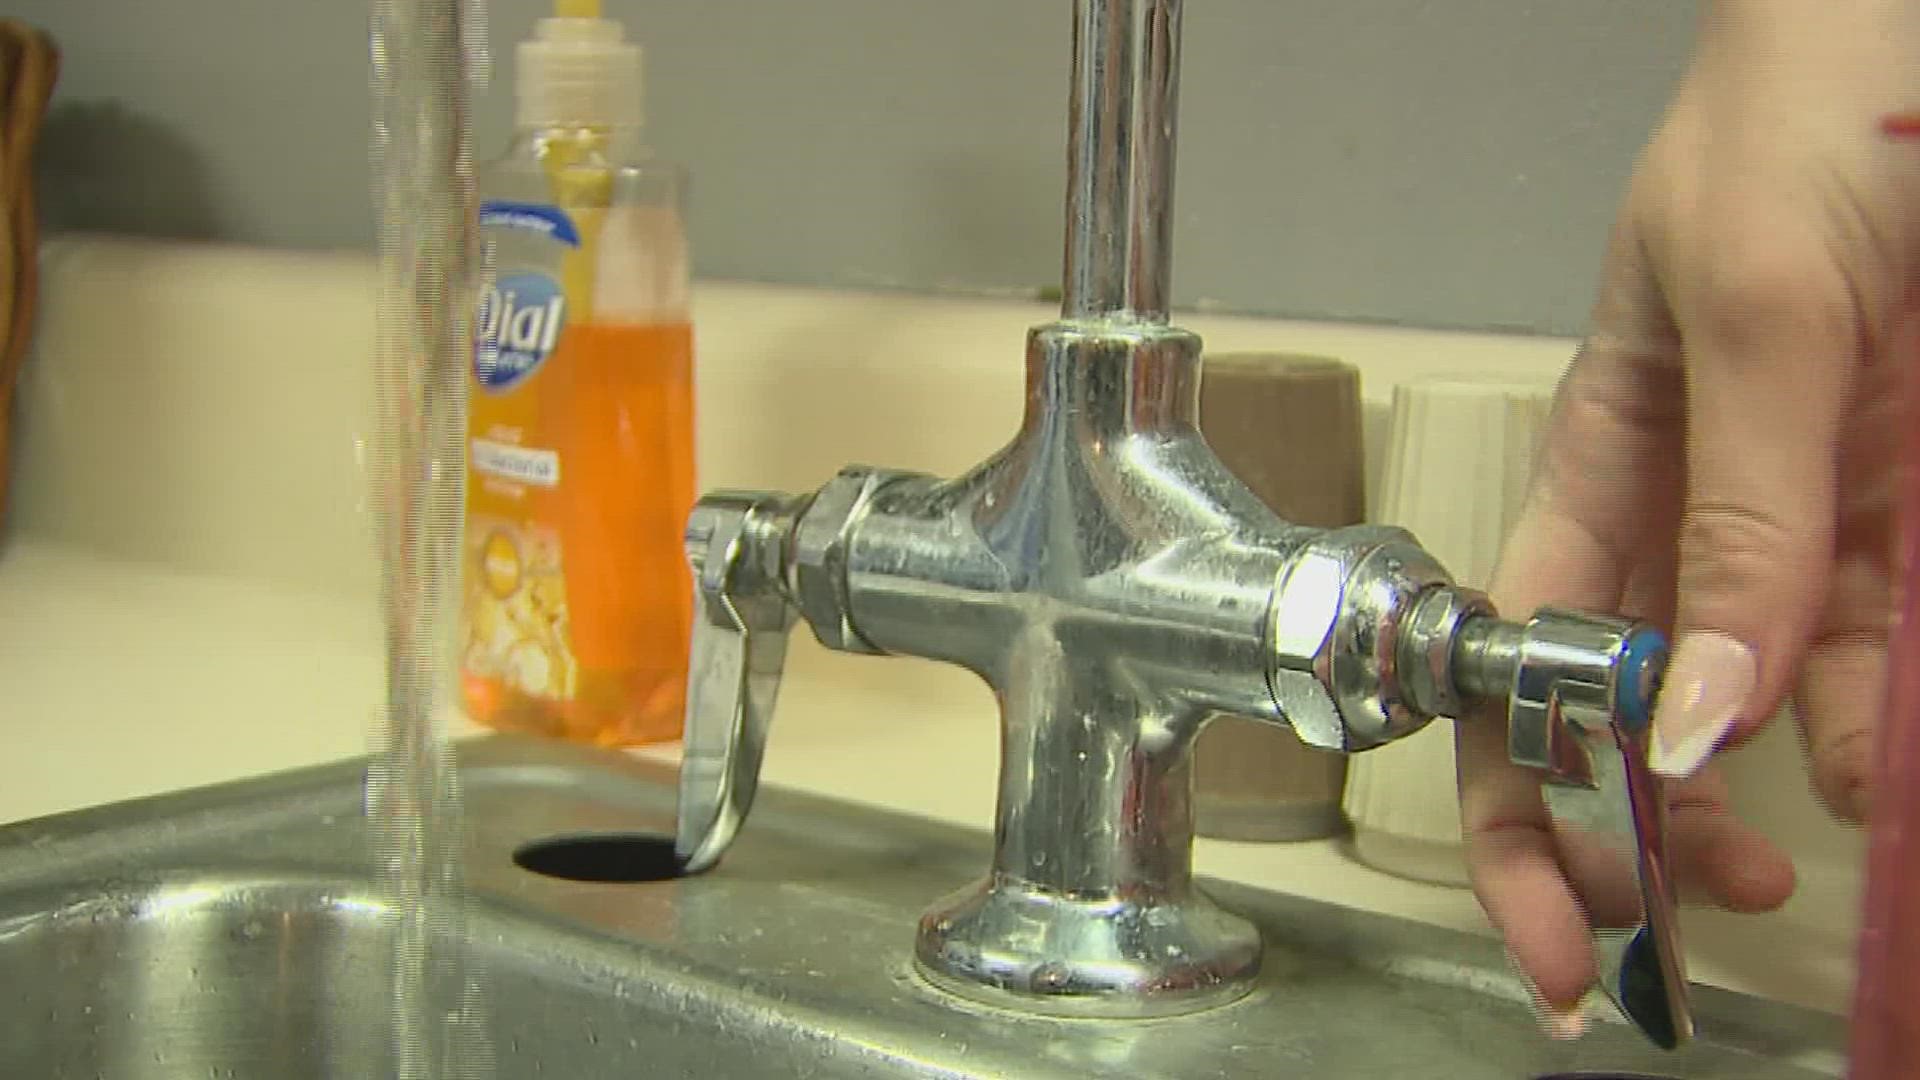 The order was issued after residents reported a pink tint from tap water.